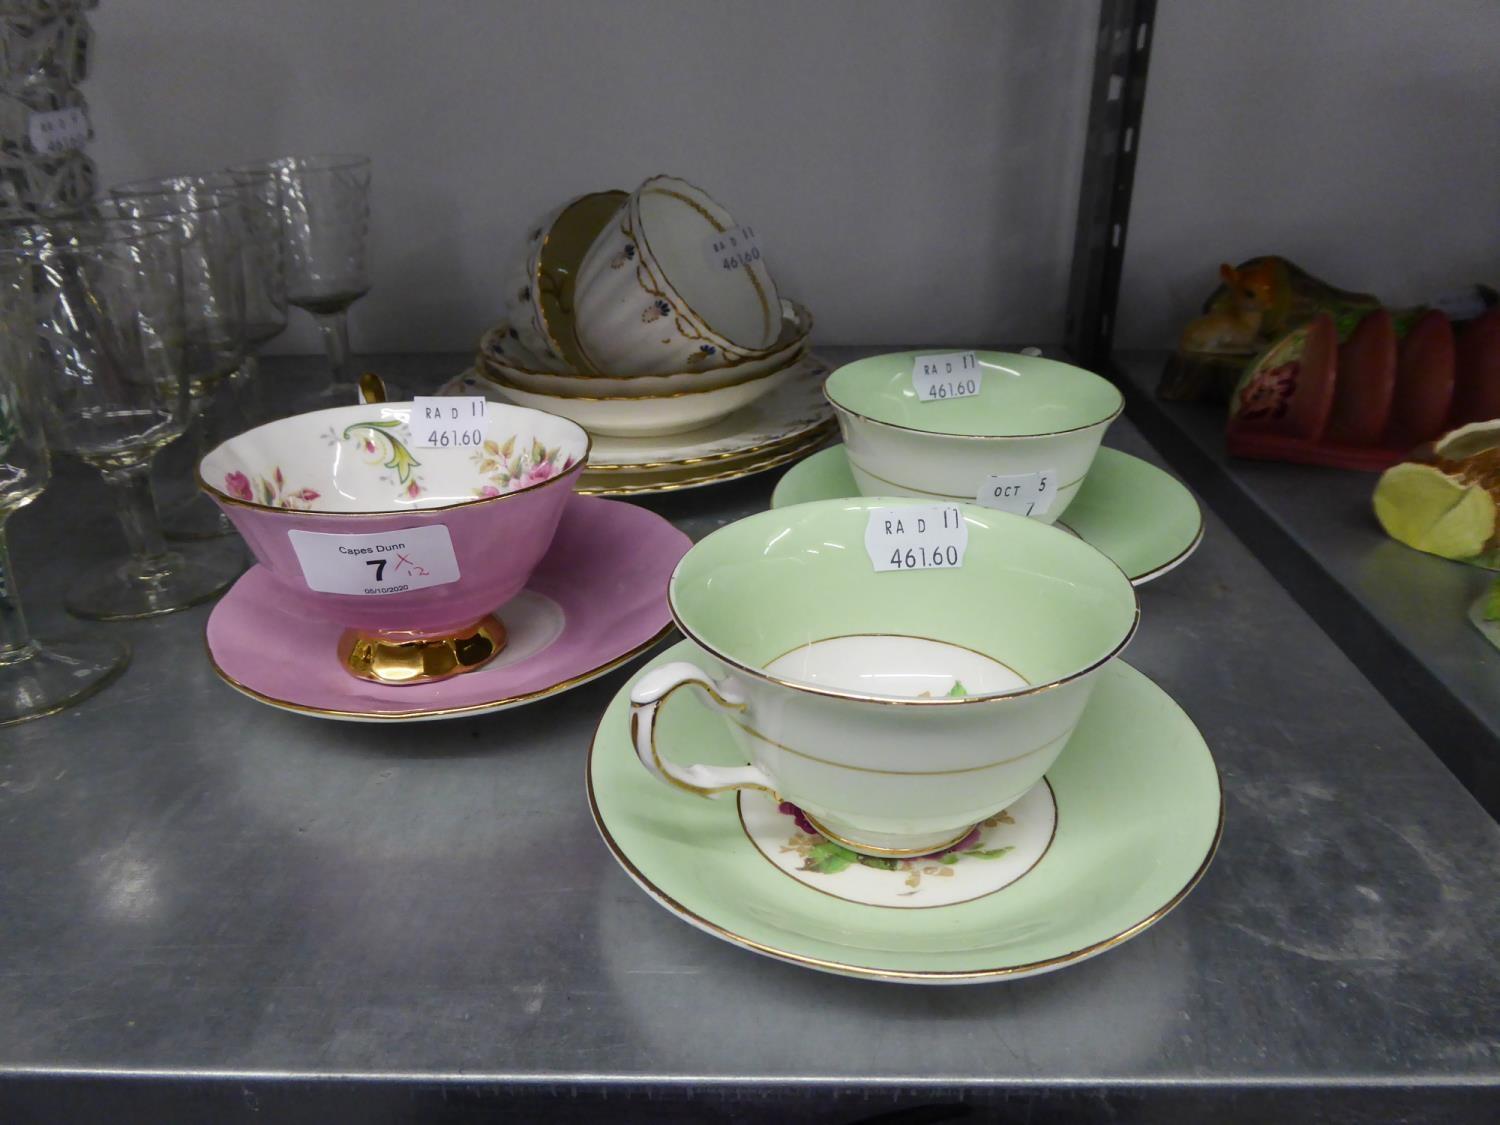 TWO TRIOS OF 19TH CENTURY FLUTED CHINA TEACUPS, SAUCERS AND SIDE PLATES AND THREE CHINA SPECIMEN